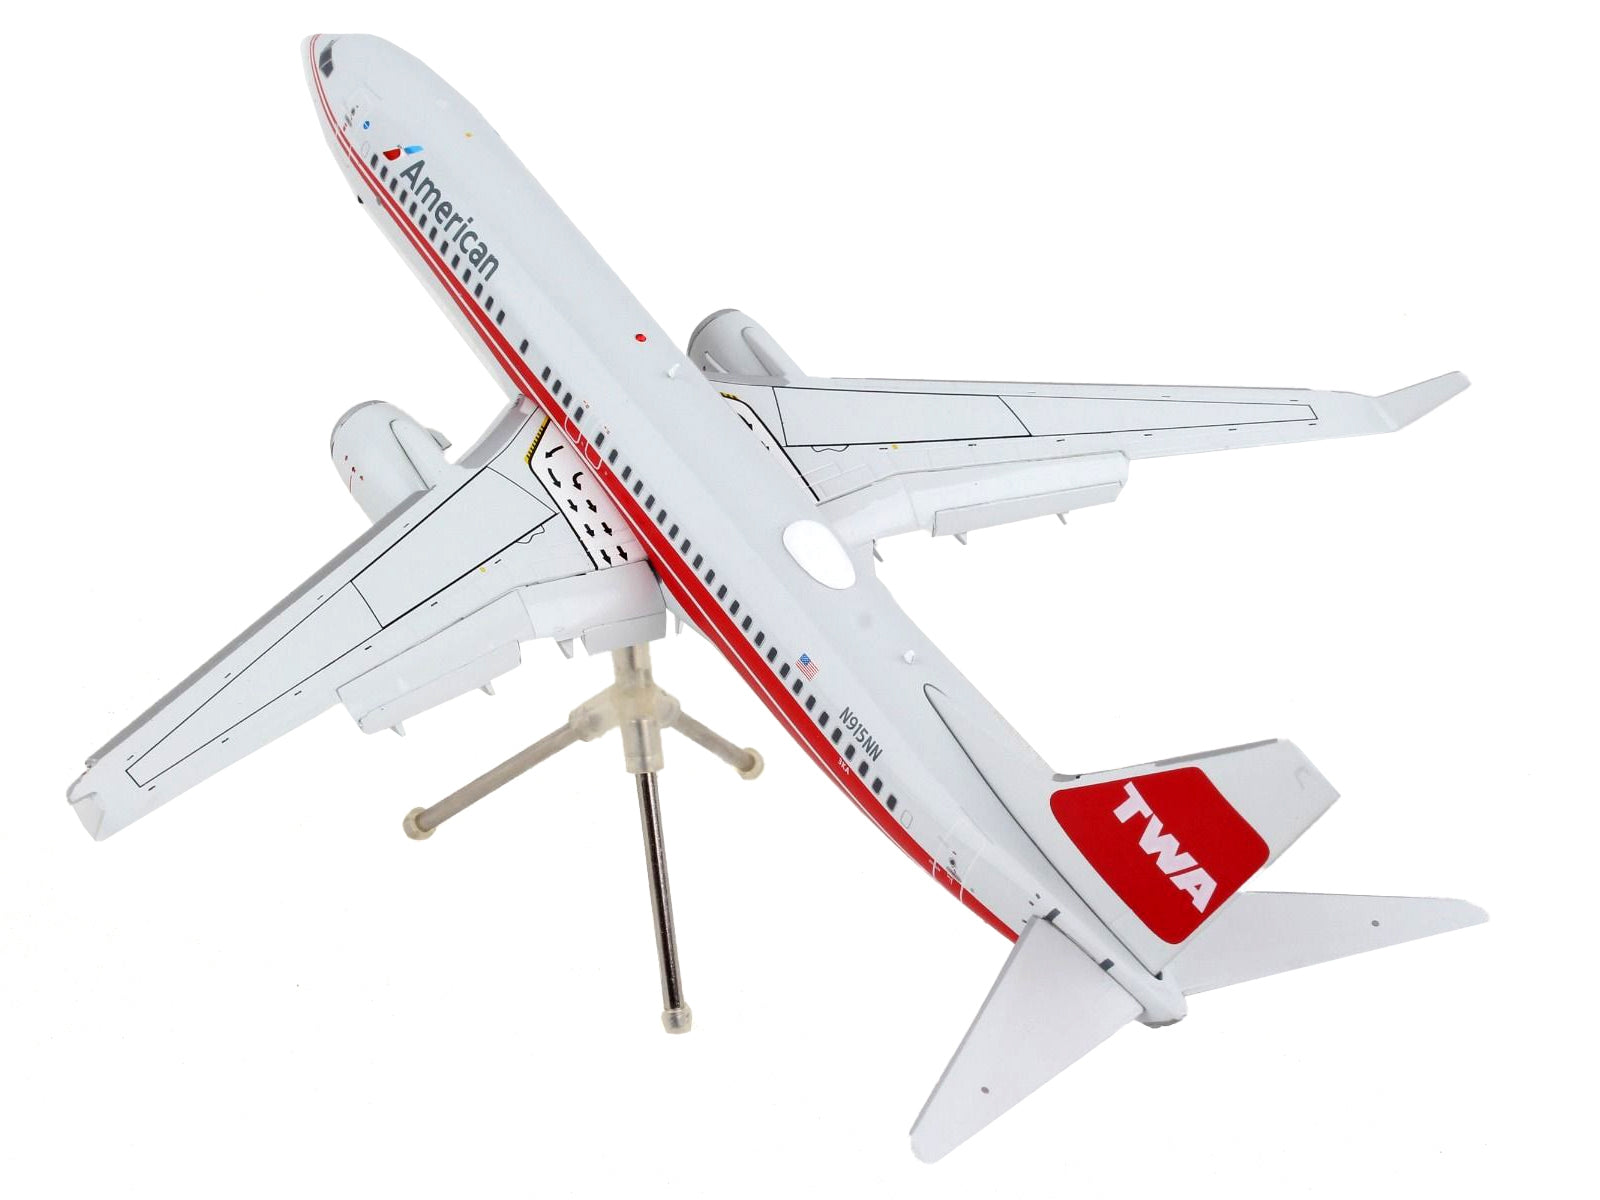 Boeing 737-800 Commercial Aircraft with Flaps Down "American Airlines - Trans World Airlines"